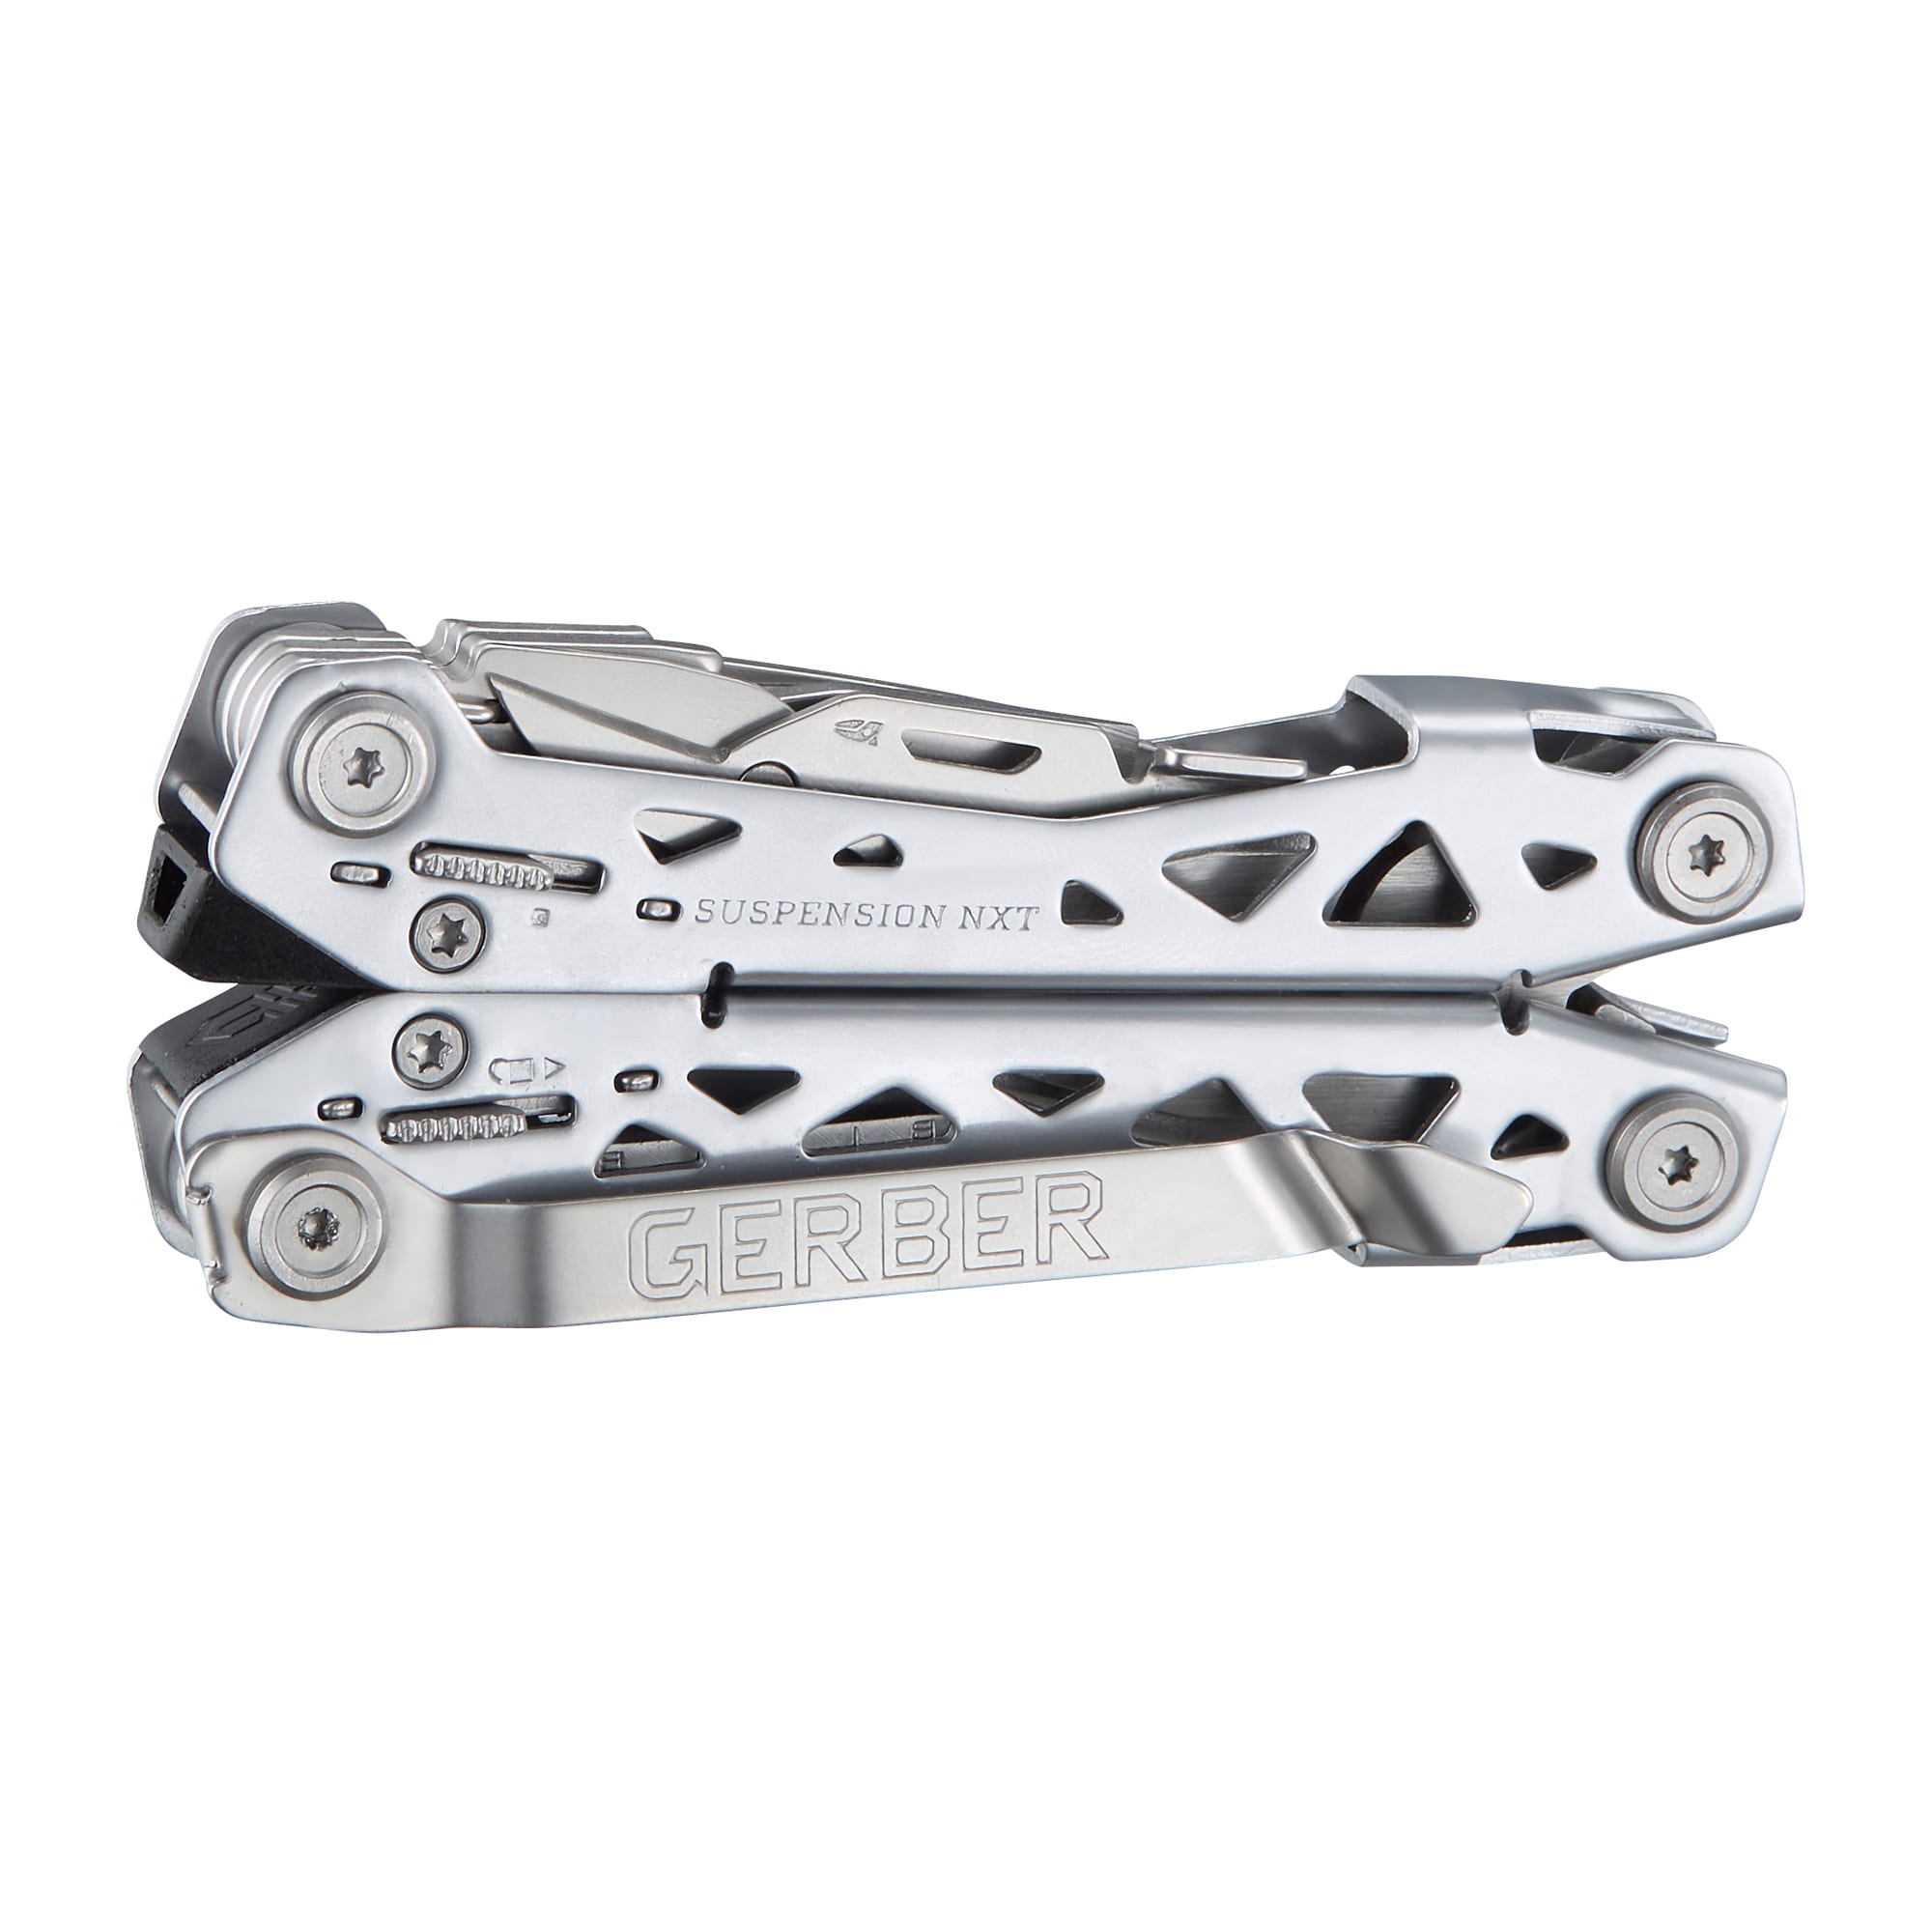 Purchase the Gerber Multi Tool Suspension Nxt silver by ASMC